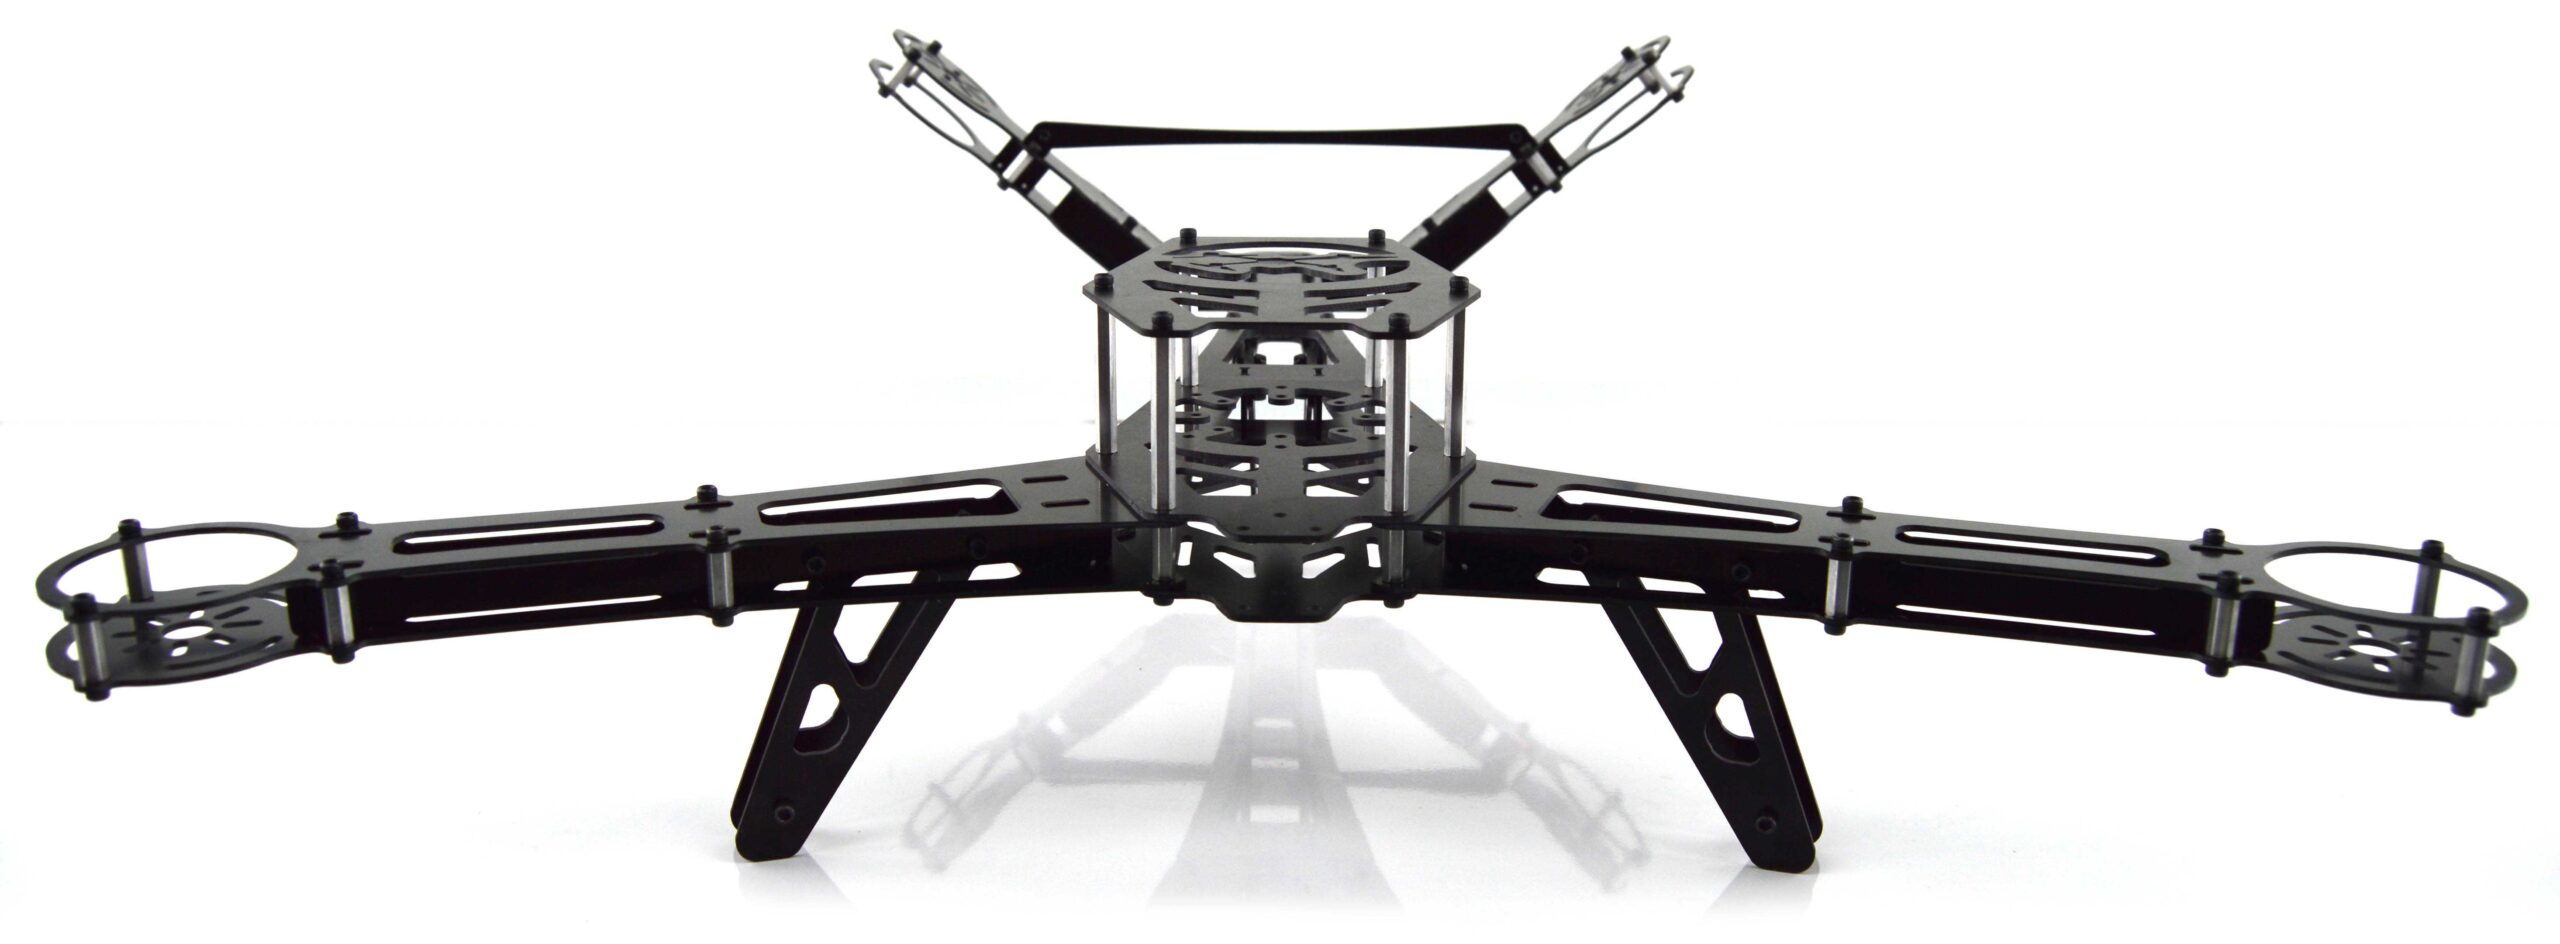 Lynxmotion VTail Drone Frame